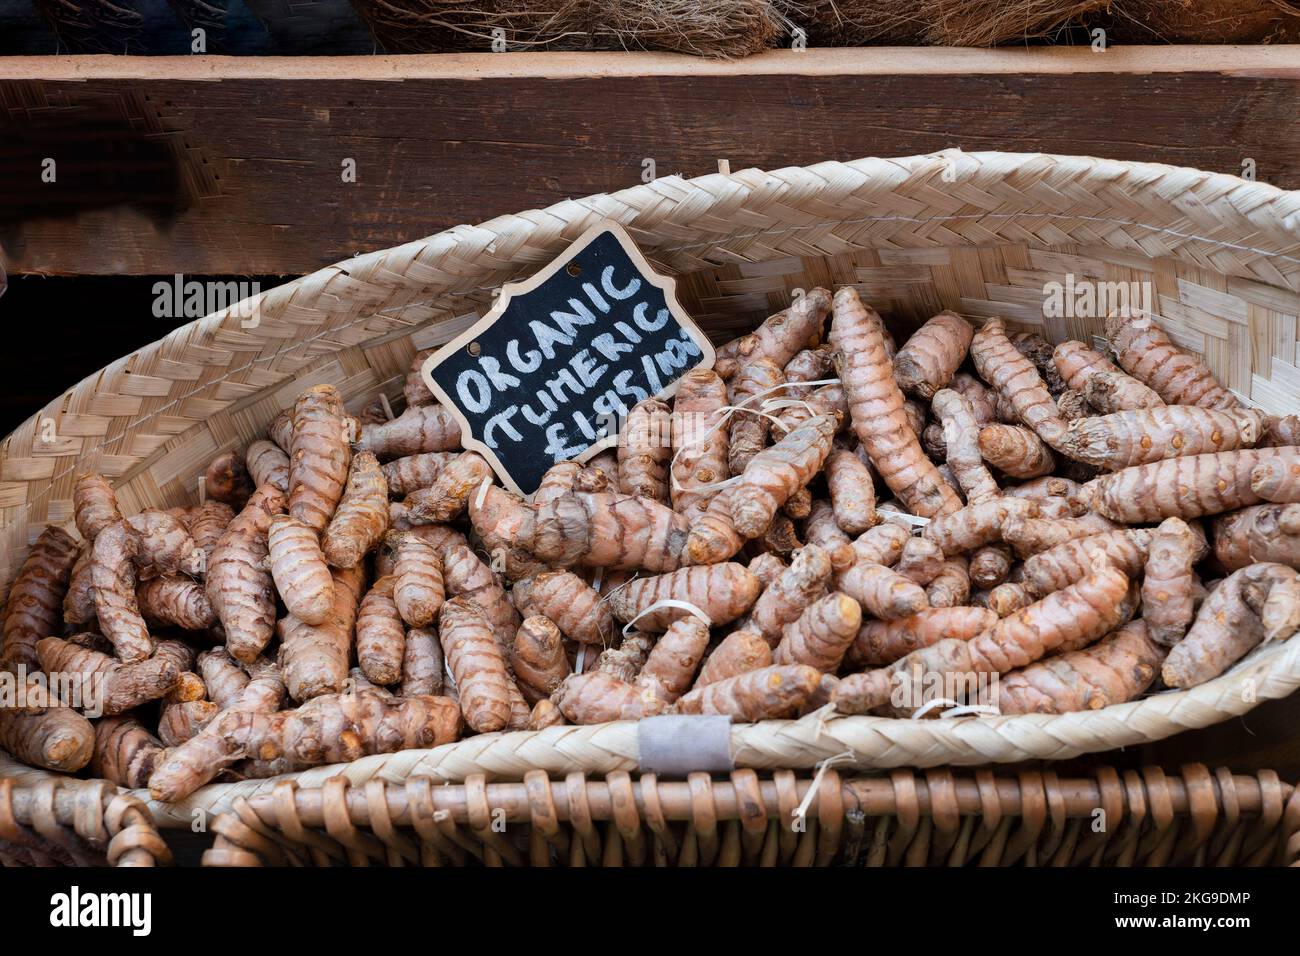 A basket display of organic fresh turmeric, Curcuma longa, for sale on a market stall. The turmeric is loose and priced for the consumer Stock Photo